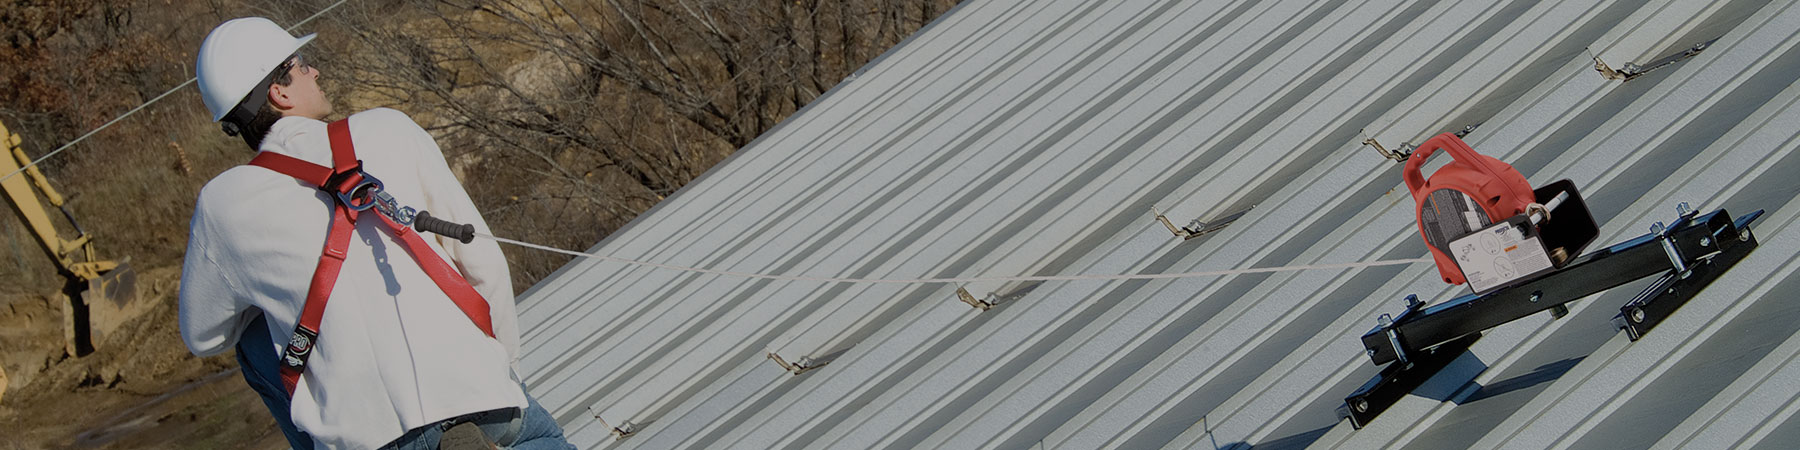 Reusable Roof Top Safety Anchors